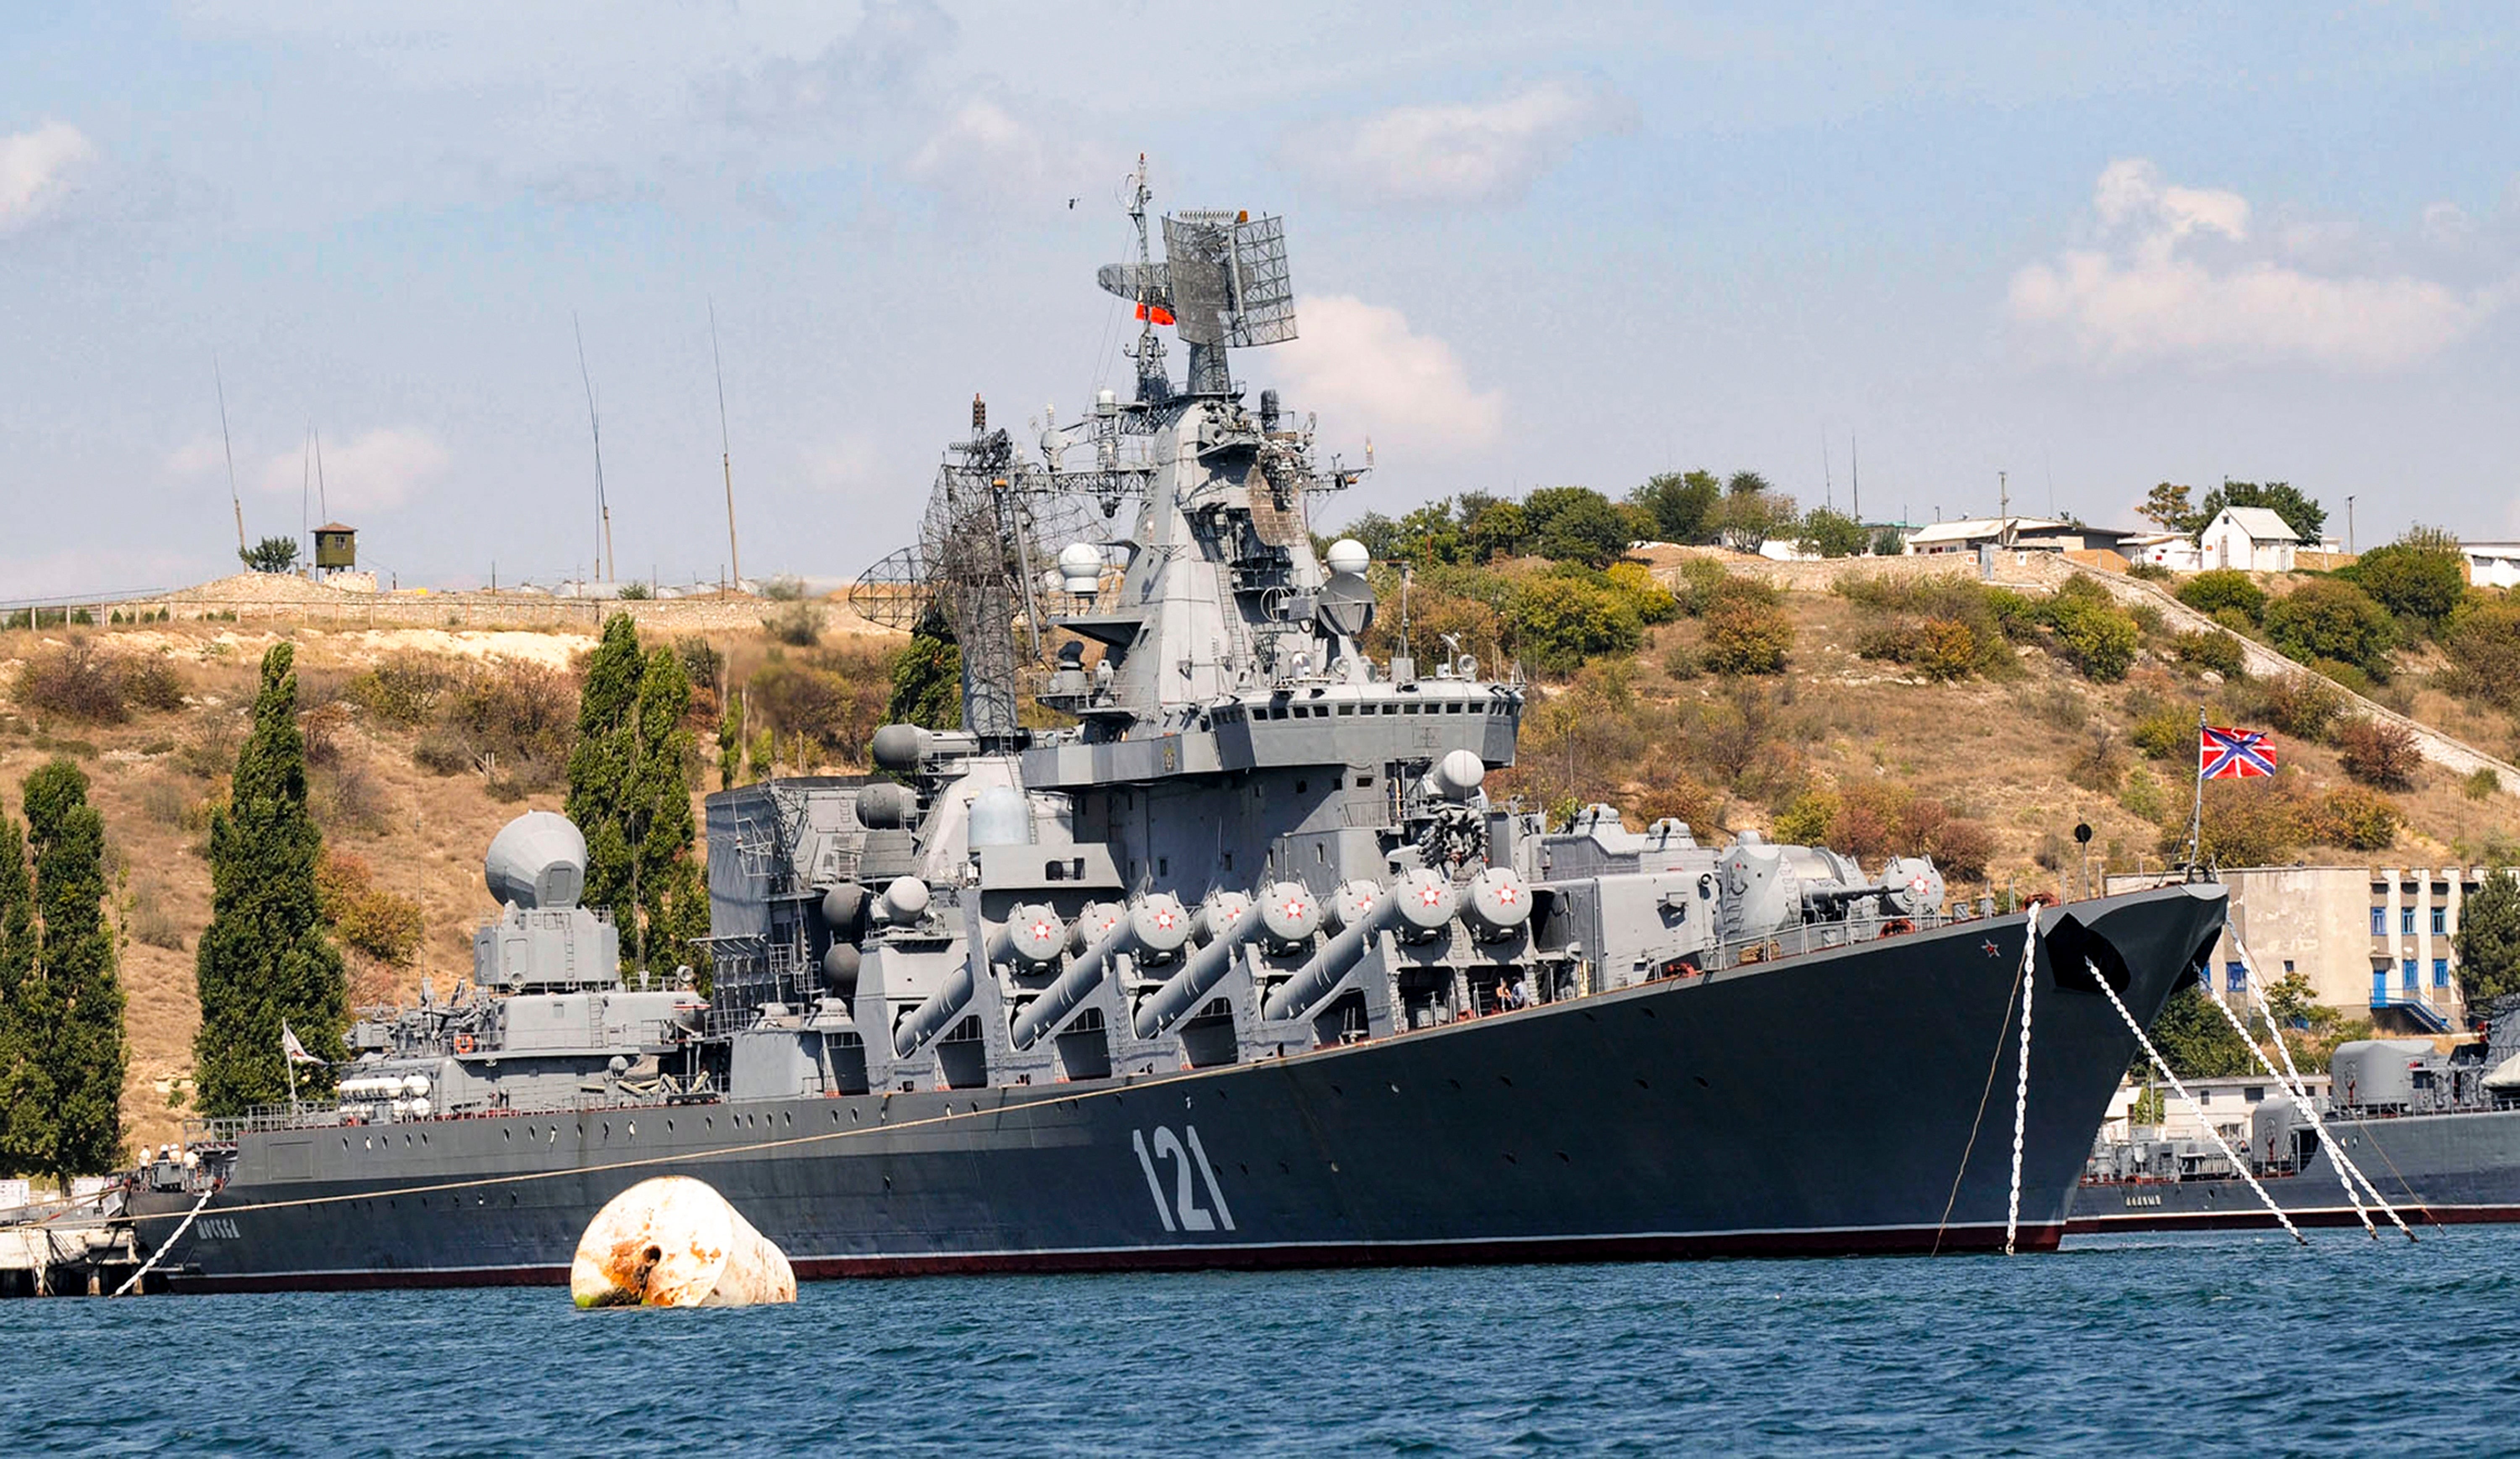 The Russian missile cruiser Moskva, the flagship of Russia’s Black Sea Fleet is seen anchored in the Black Sea port